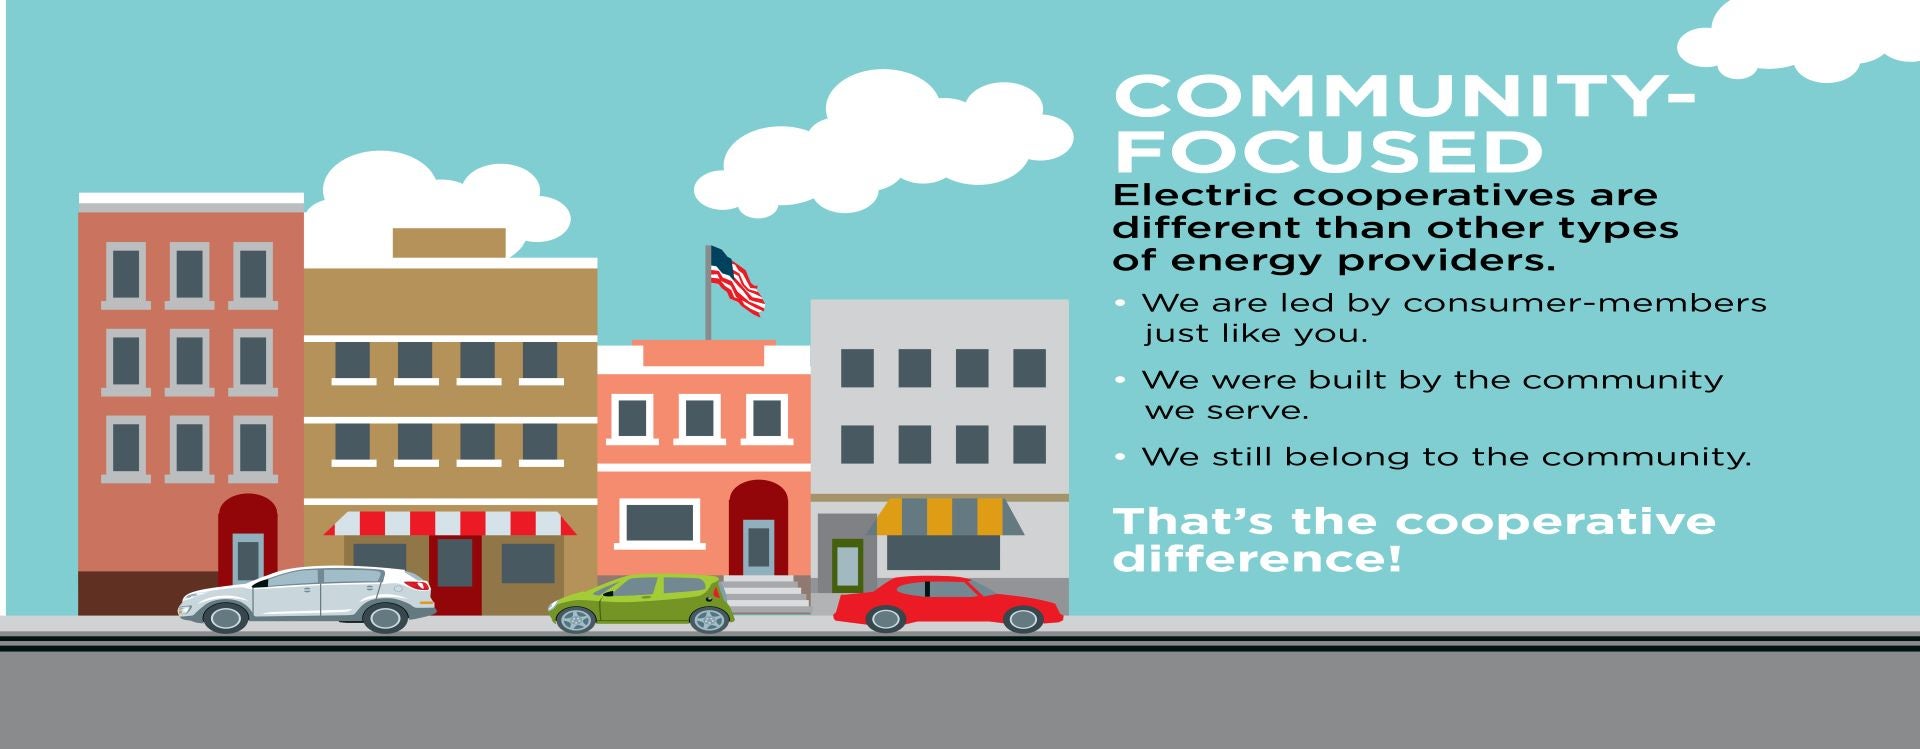 Electrical Cooperatives Community Infographic